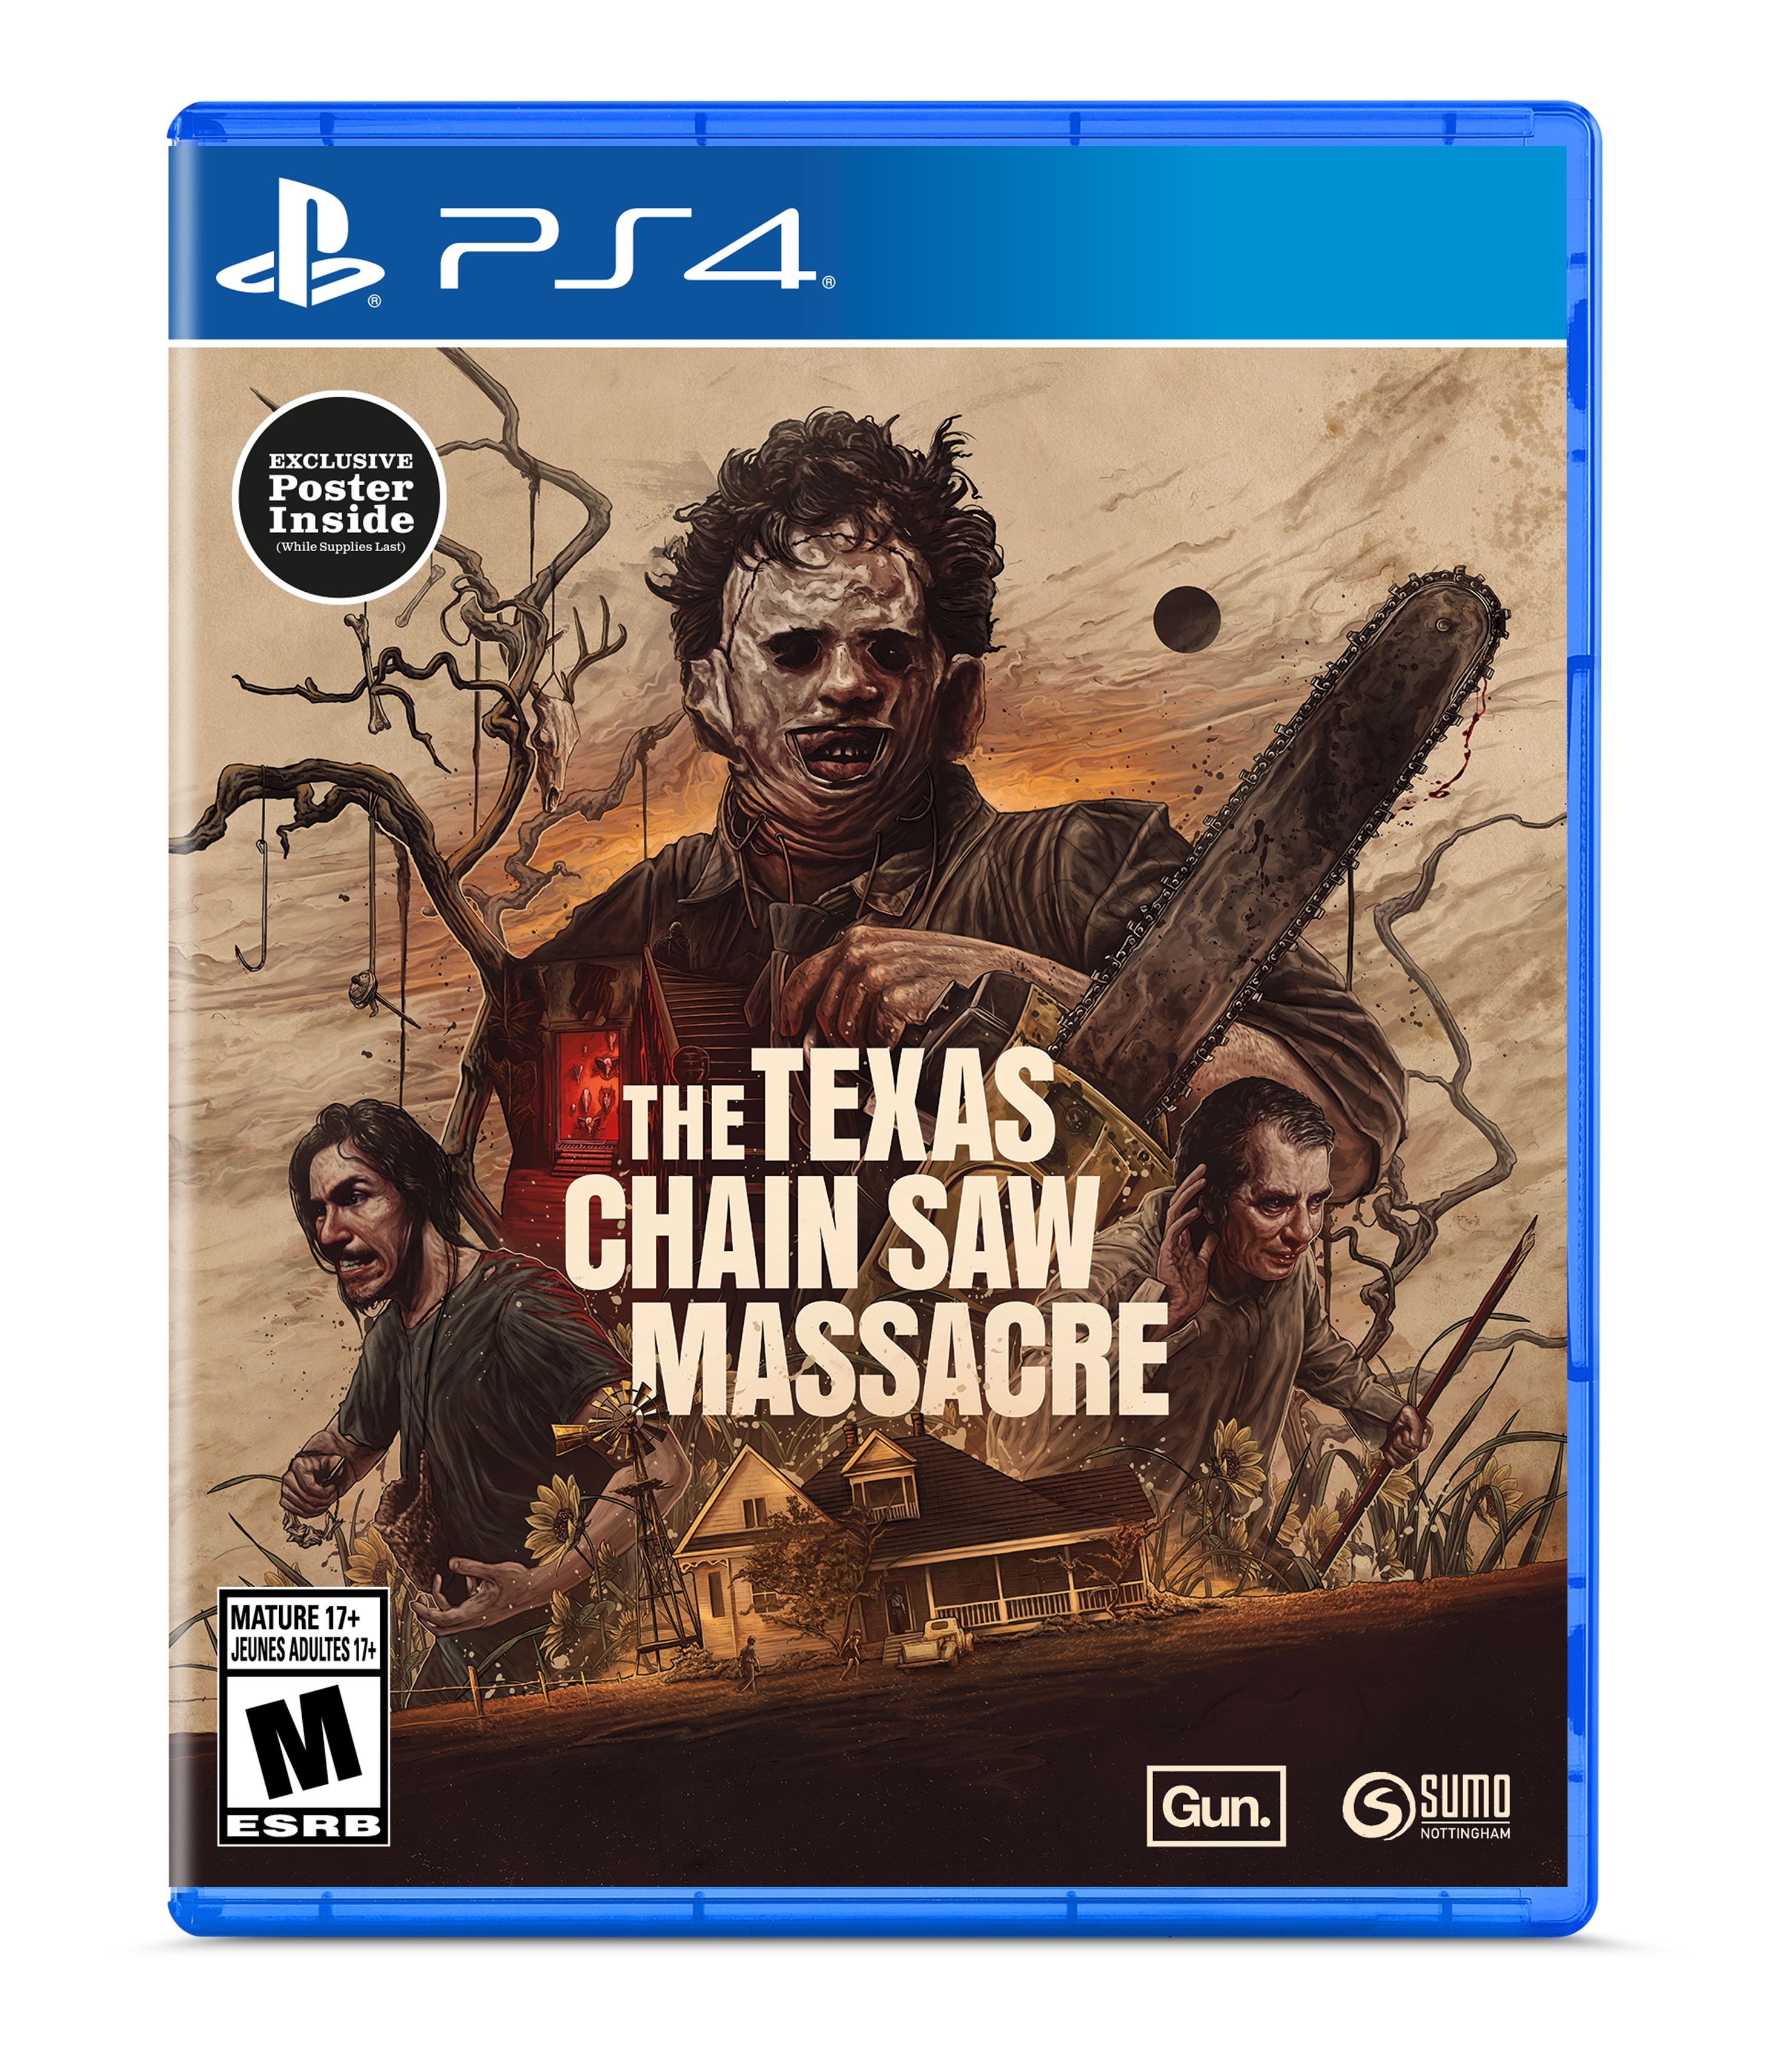 A 'Texas Chainsaw Massacre' Tabletop Game Is Releasing This Fall